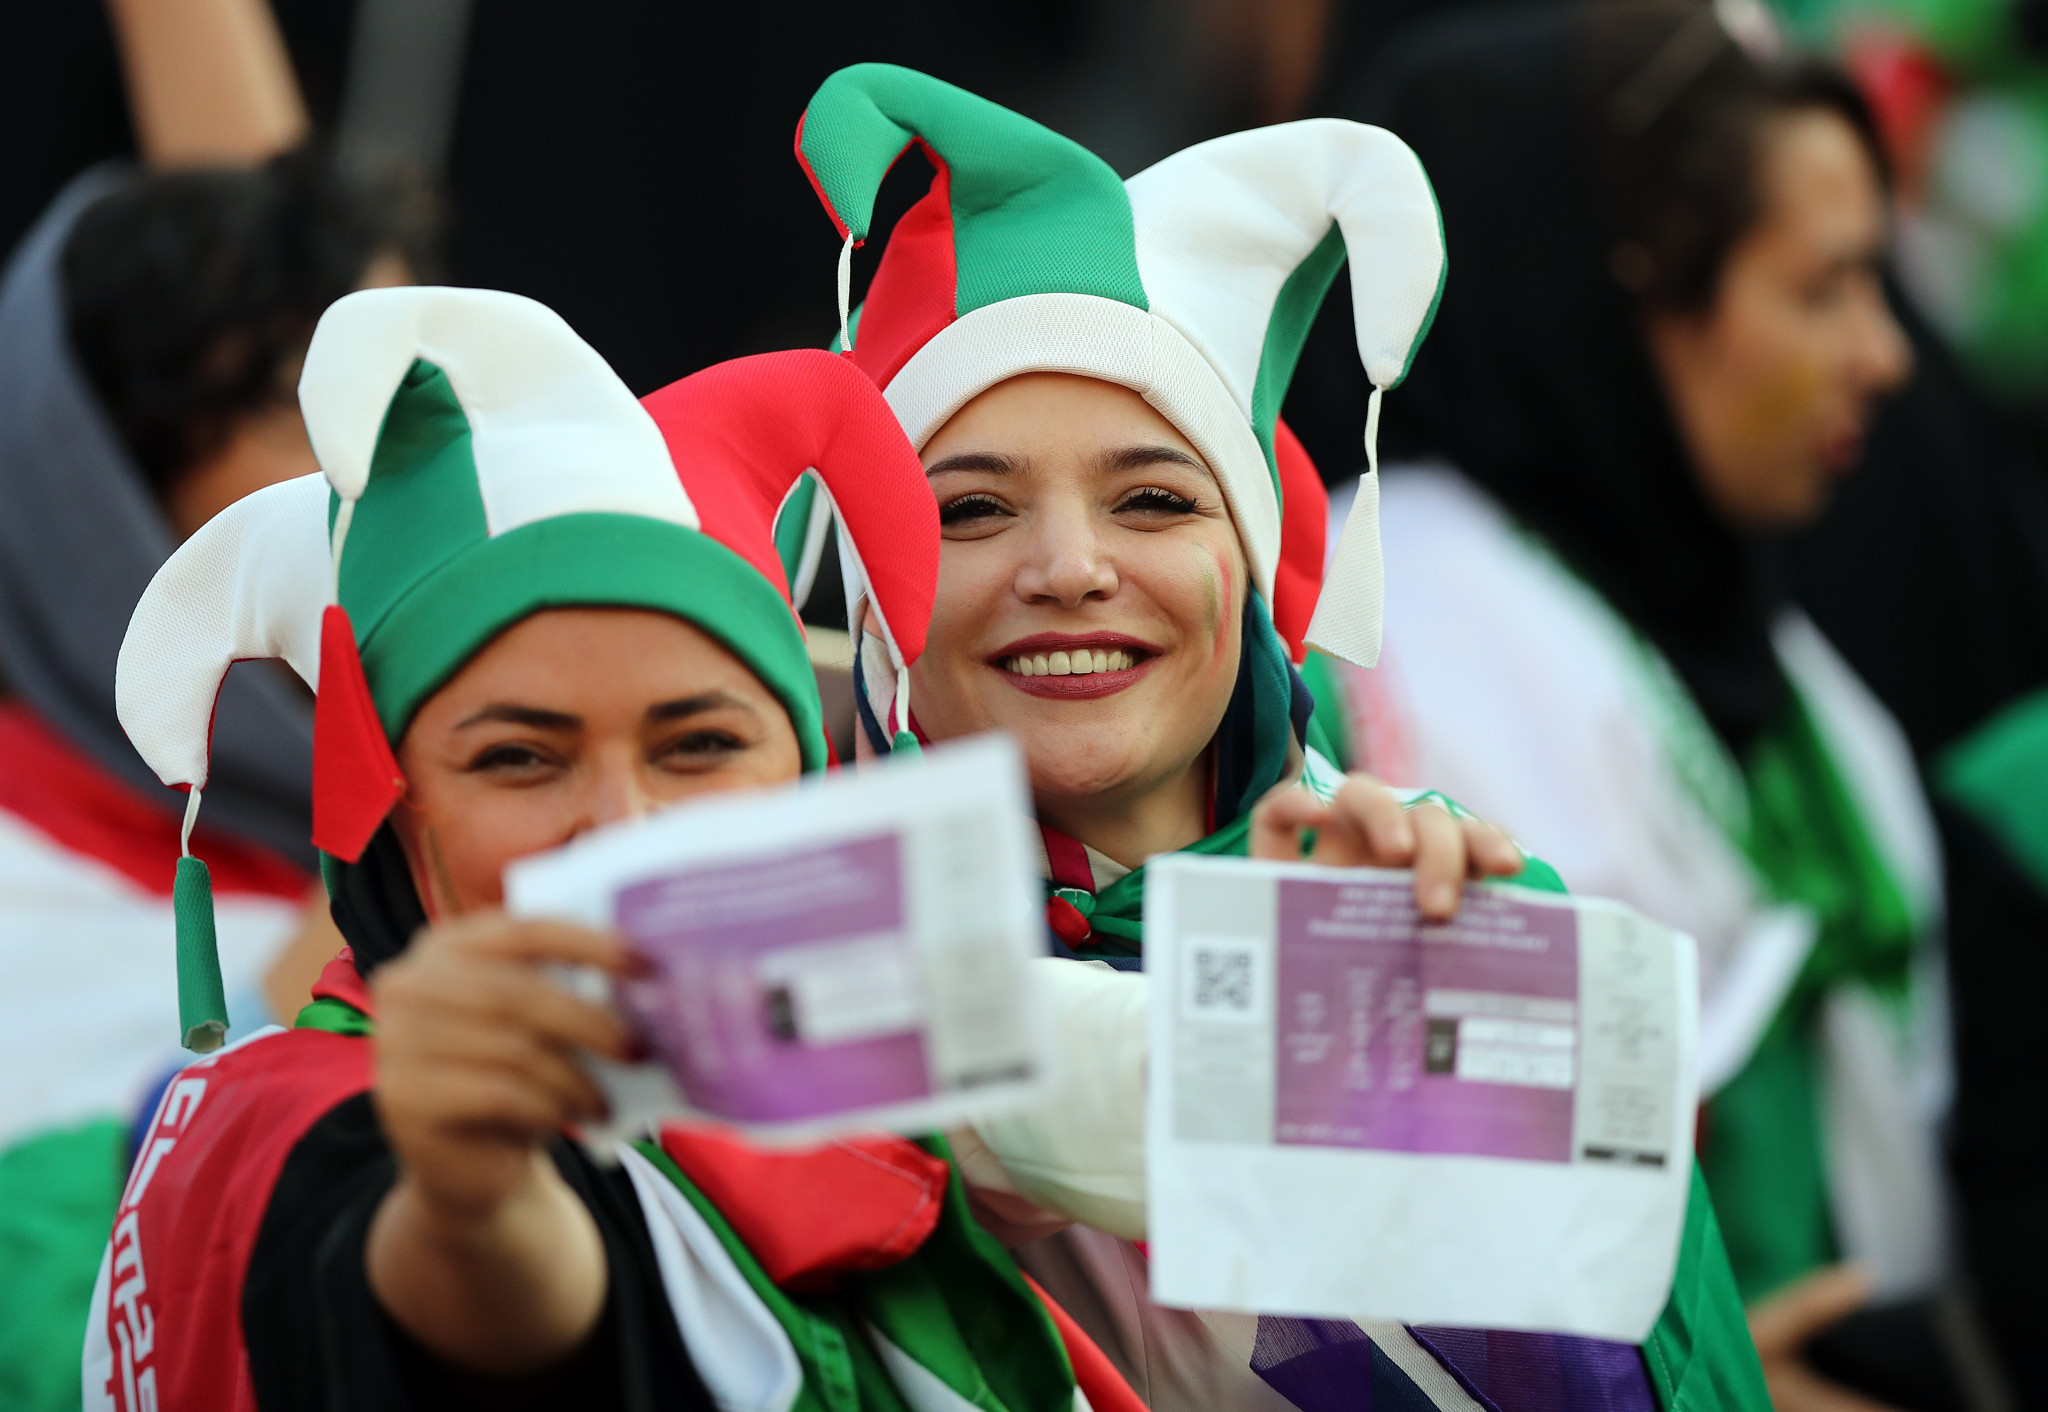 Around 4,600 women were allowed to watch the FIFA 2022 World Cup qualifying match between Iran and Cambodia in Tehran, marking a break in a 40-year-ban ©Getty Images